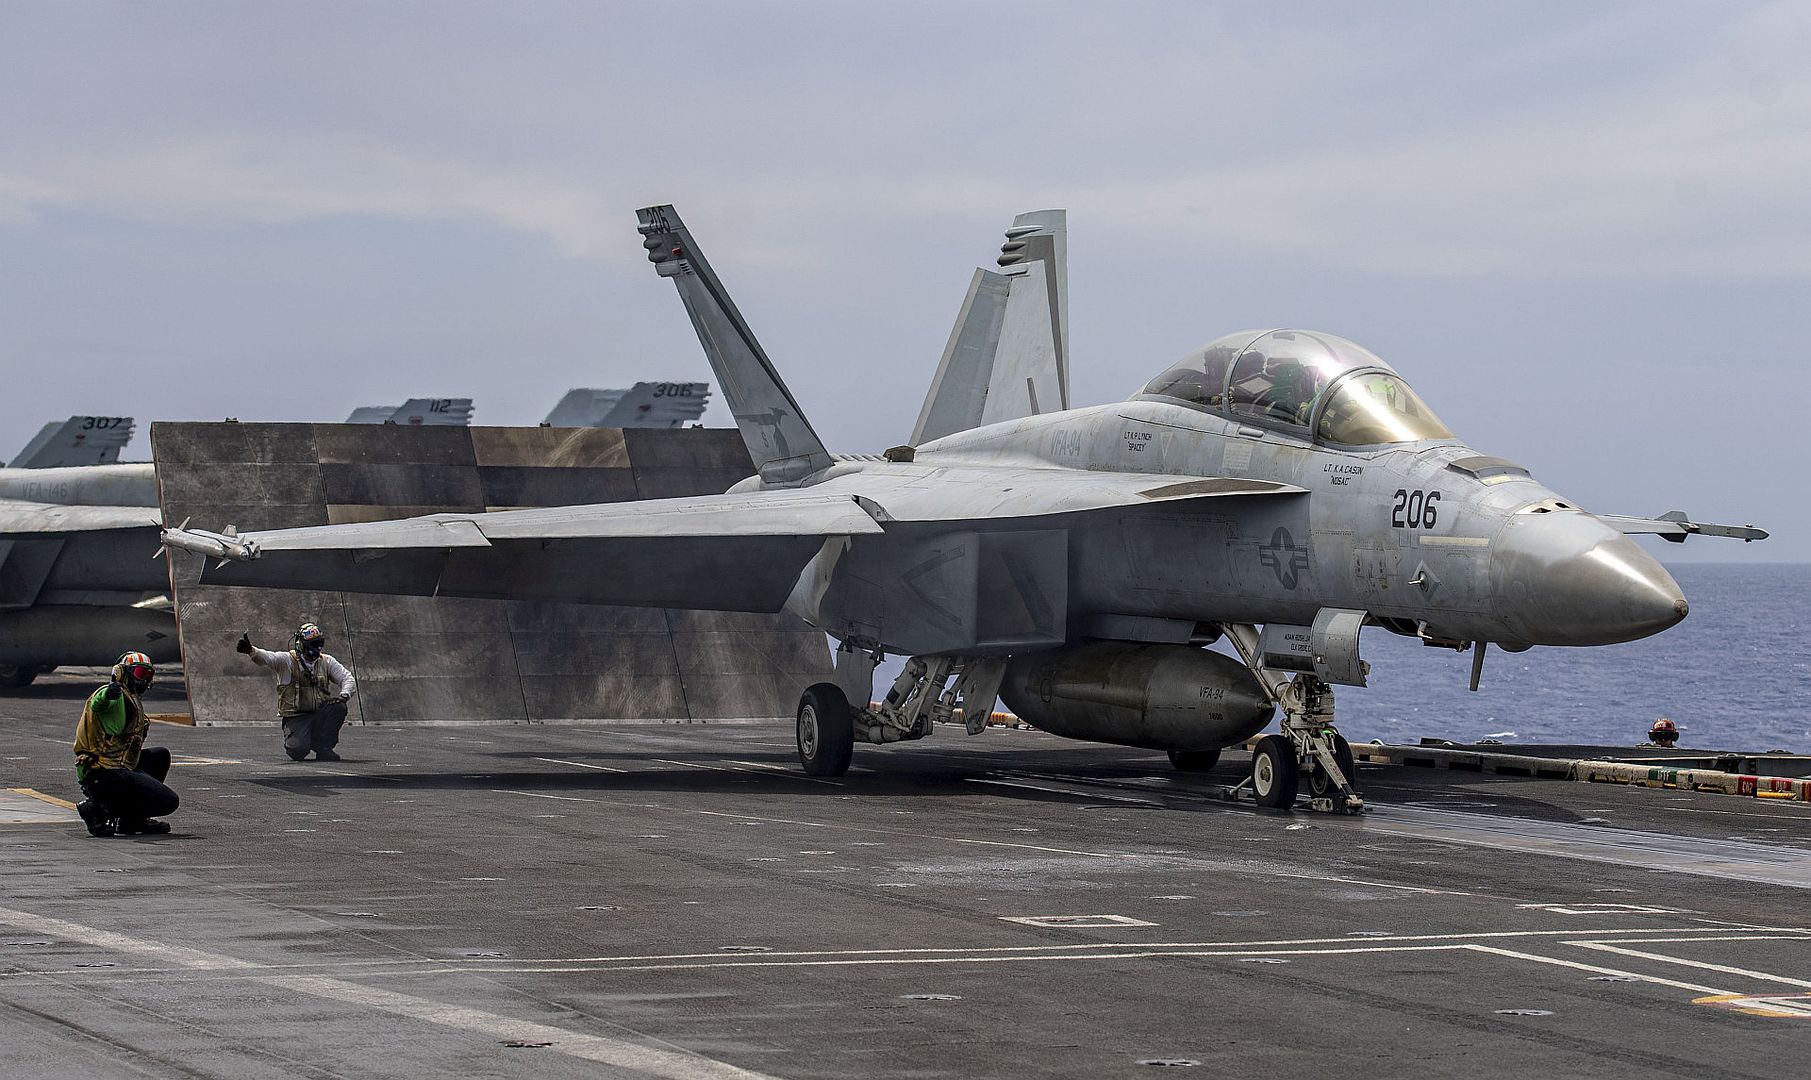  94 Launches From The Flight Deck Of The Aircraft Carrier USS Nimitz 5Q3PuCpxJMFtjbaLPmmoUj